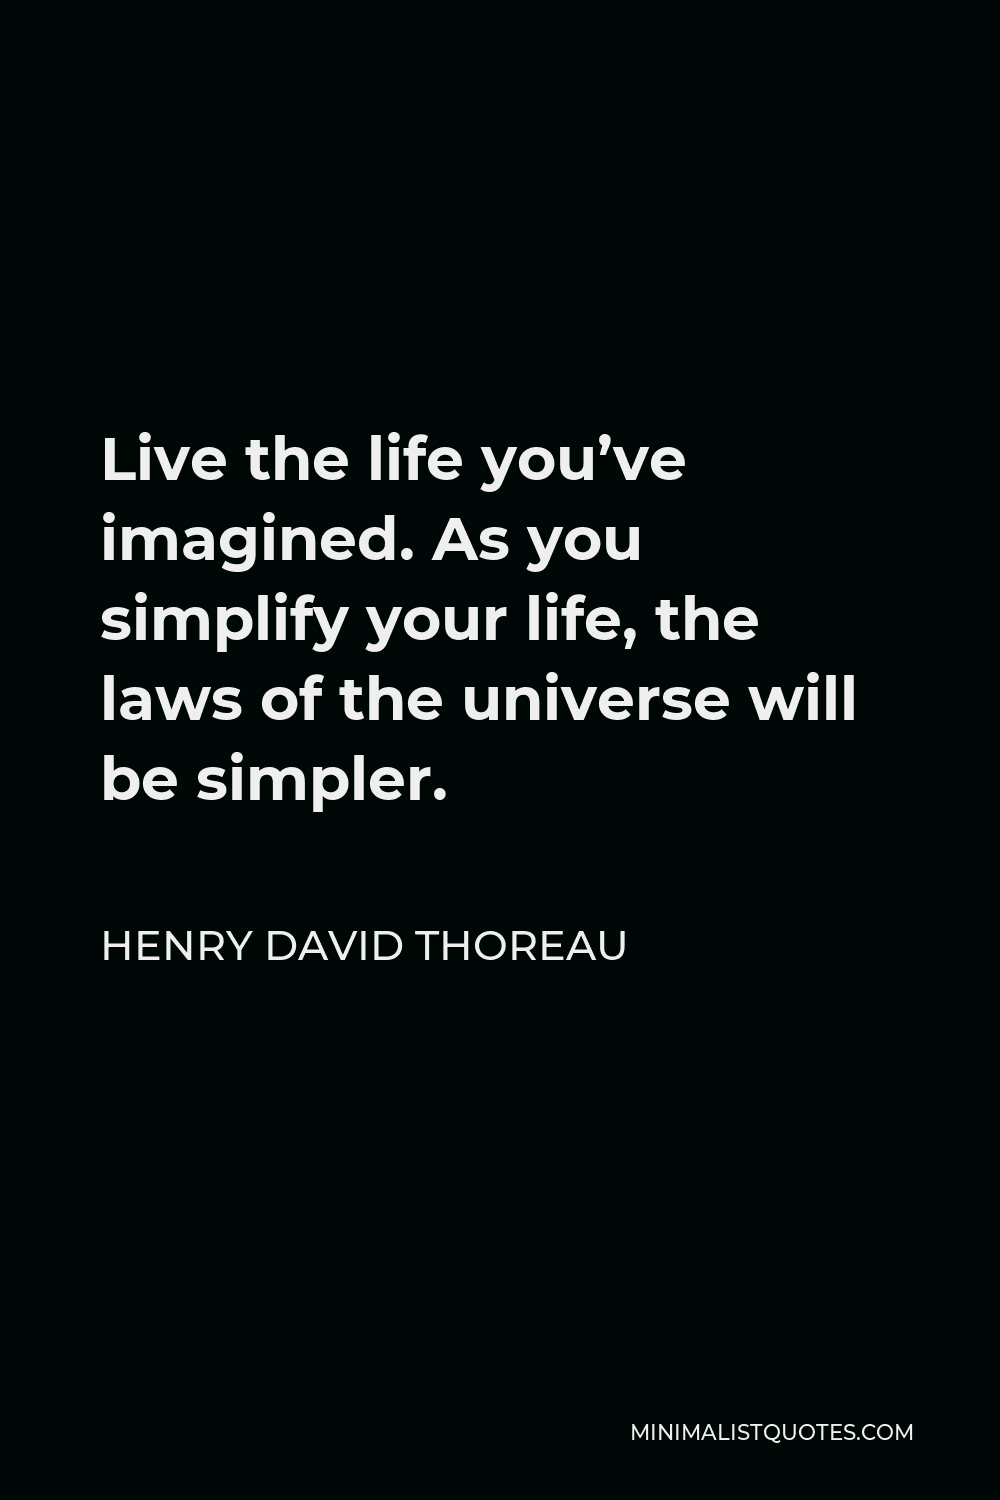 Henry David Thoreau Quote - Live the life you’ve imagined. As you simplify your life, the laws of the universe will be simpler.